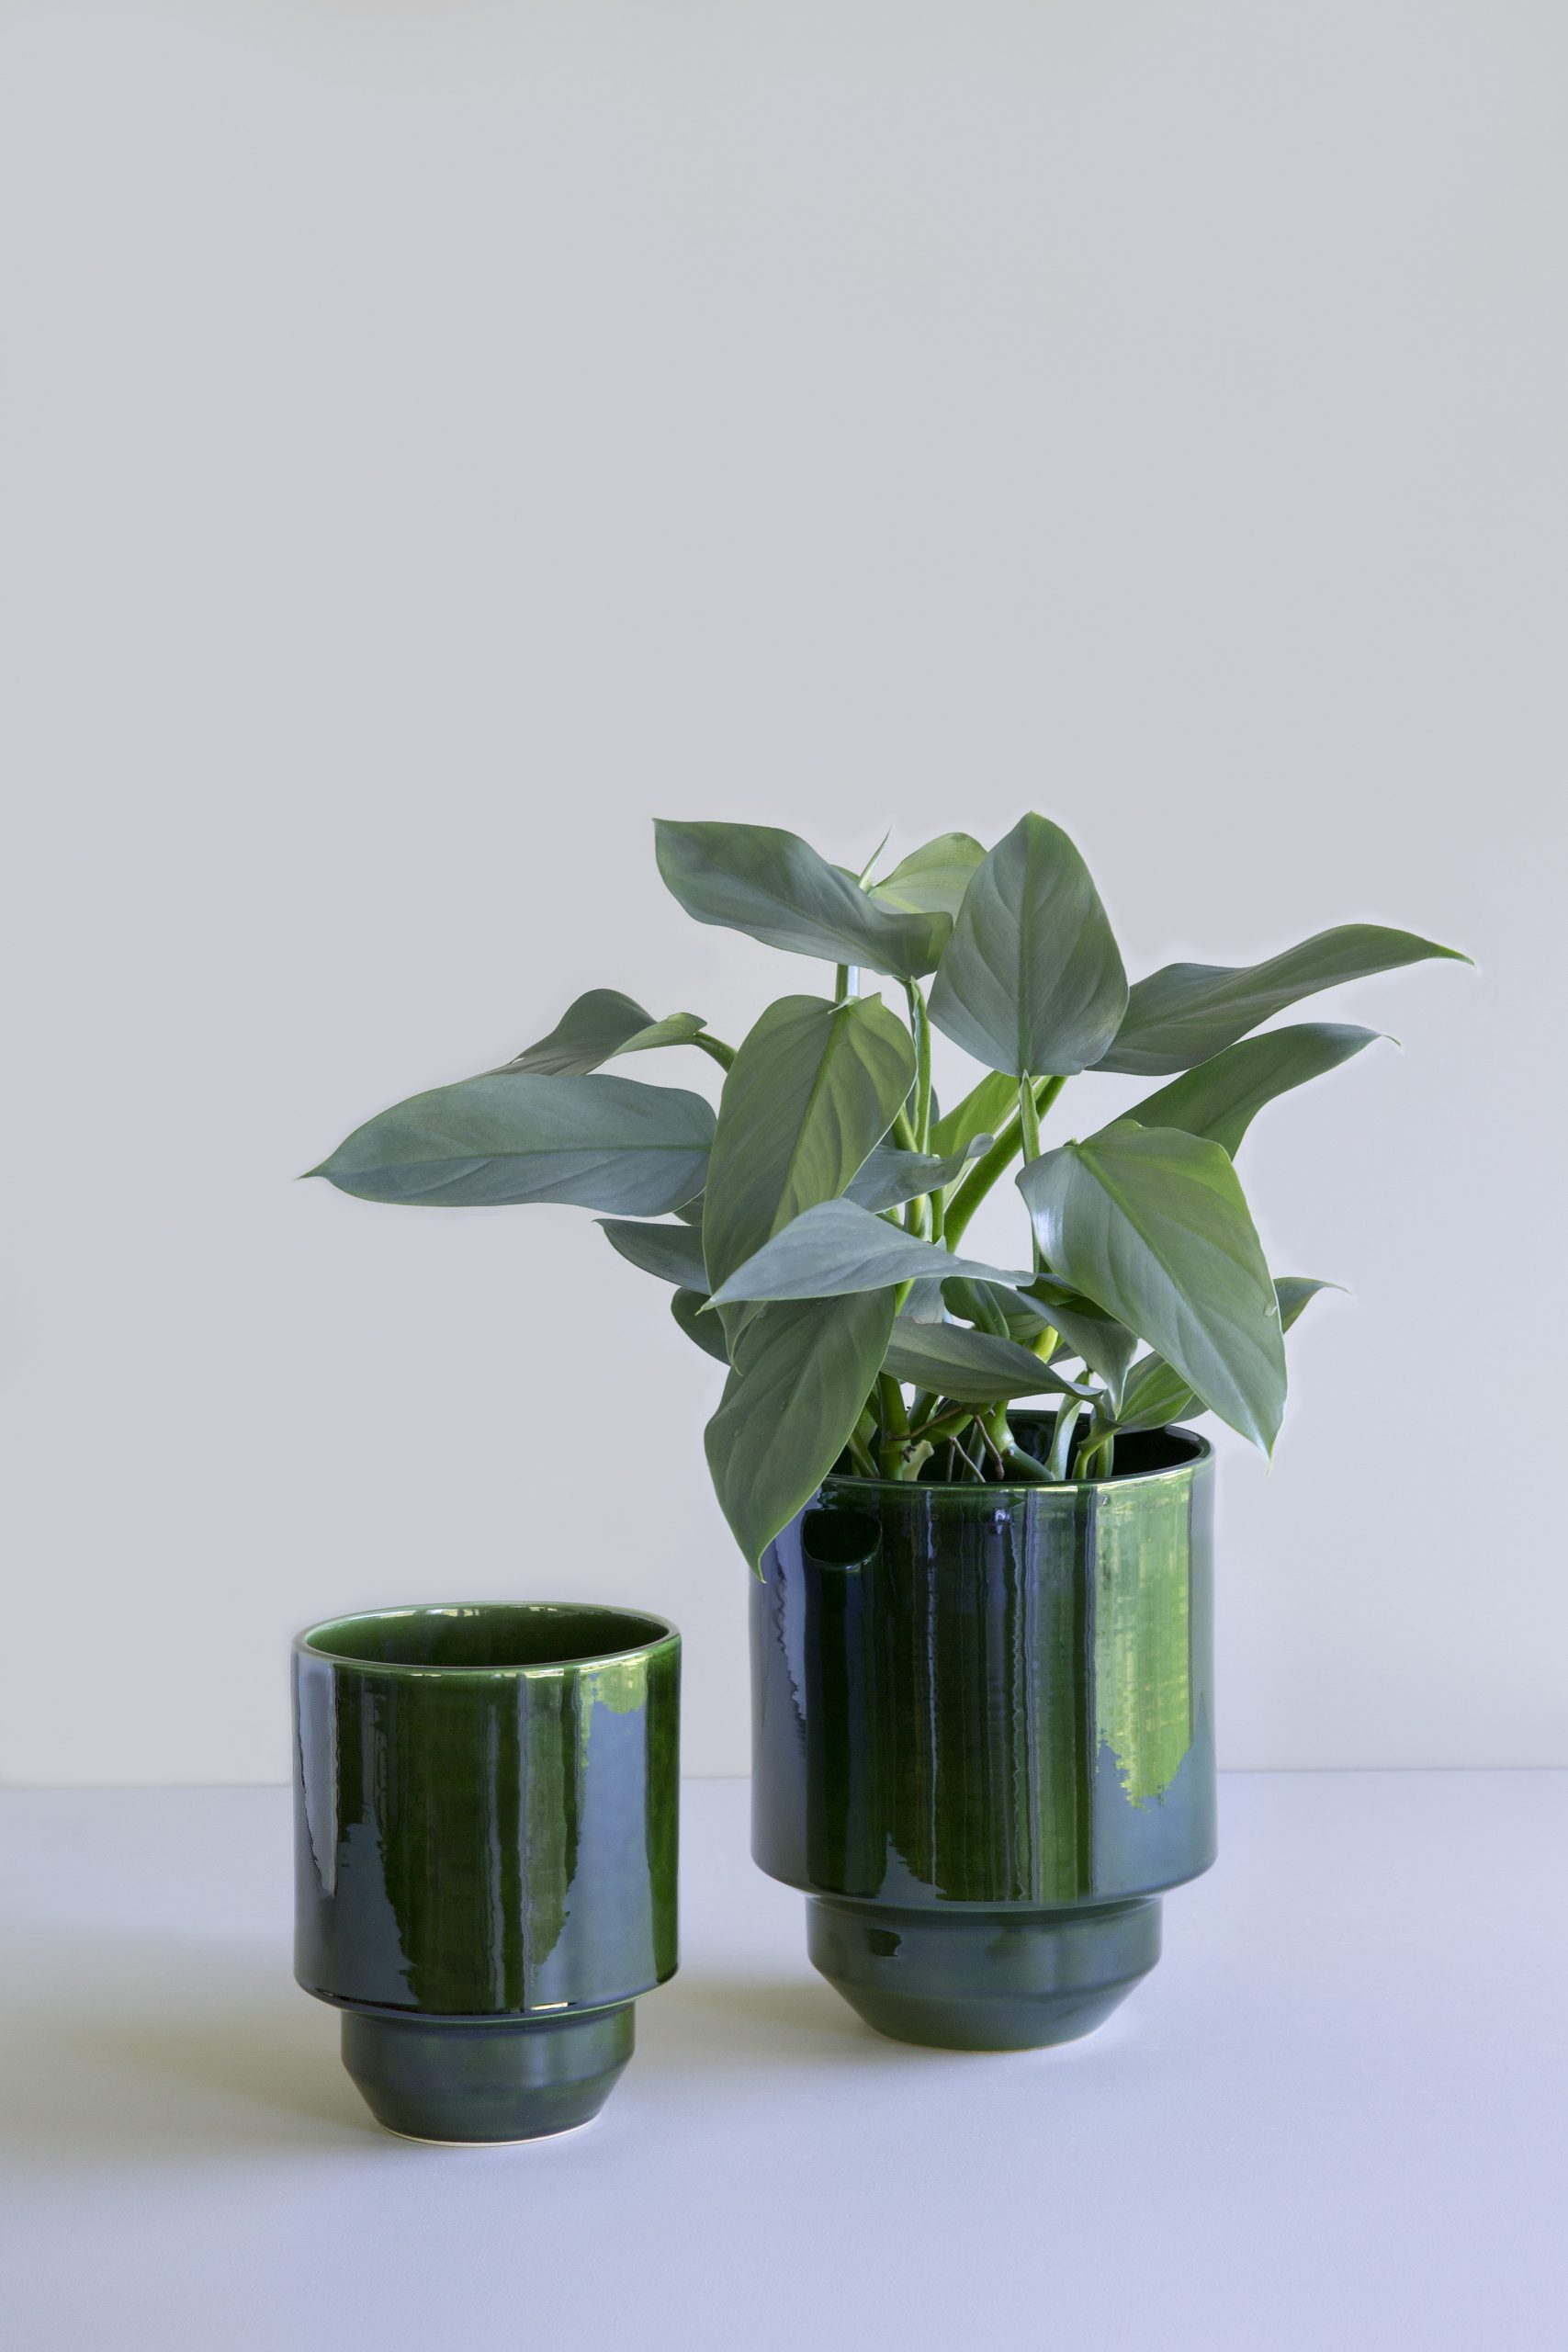 Two glazed green pots, the largest one with a plant.